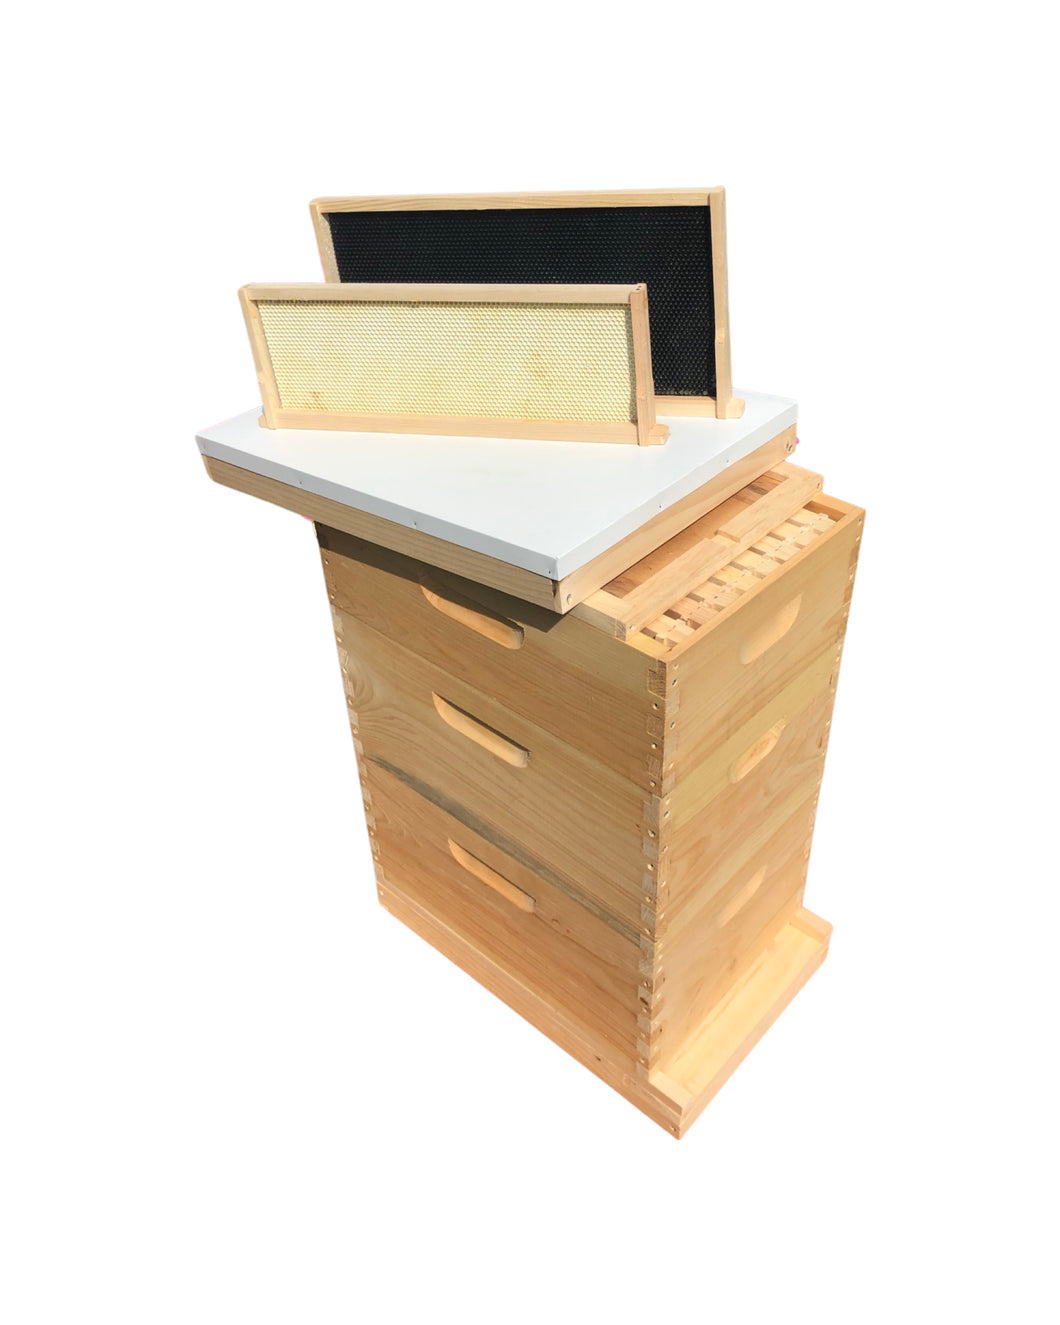 2 Deep 1 Medium Complete Bee Hive kit w/Frames & Foundations (Un-Assembled) Langstroth